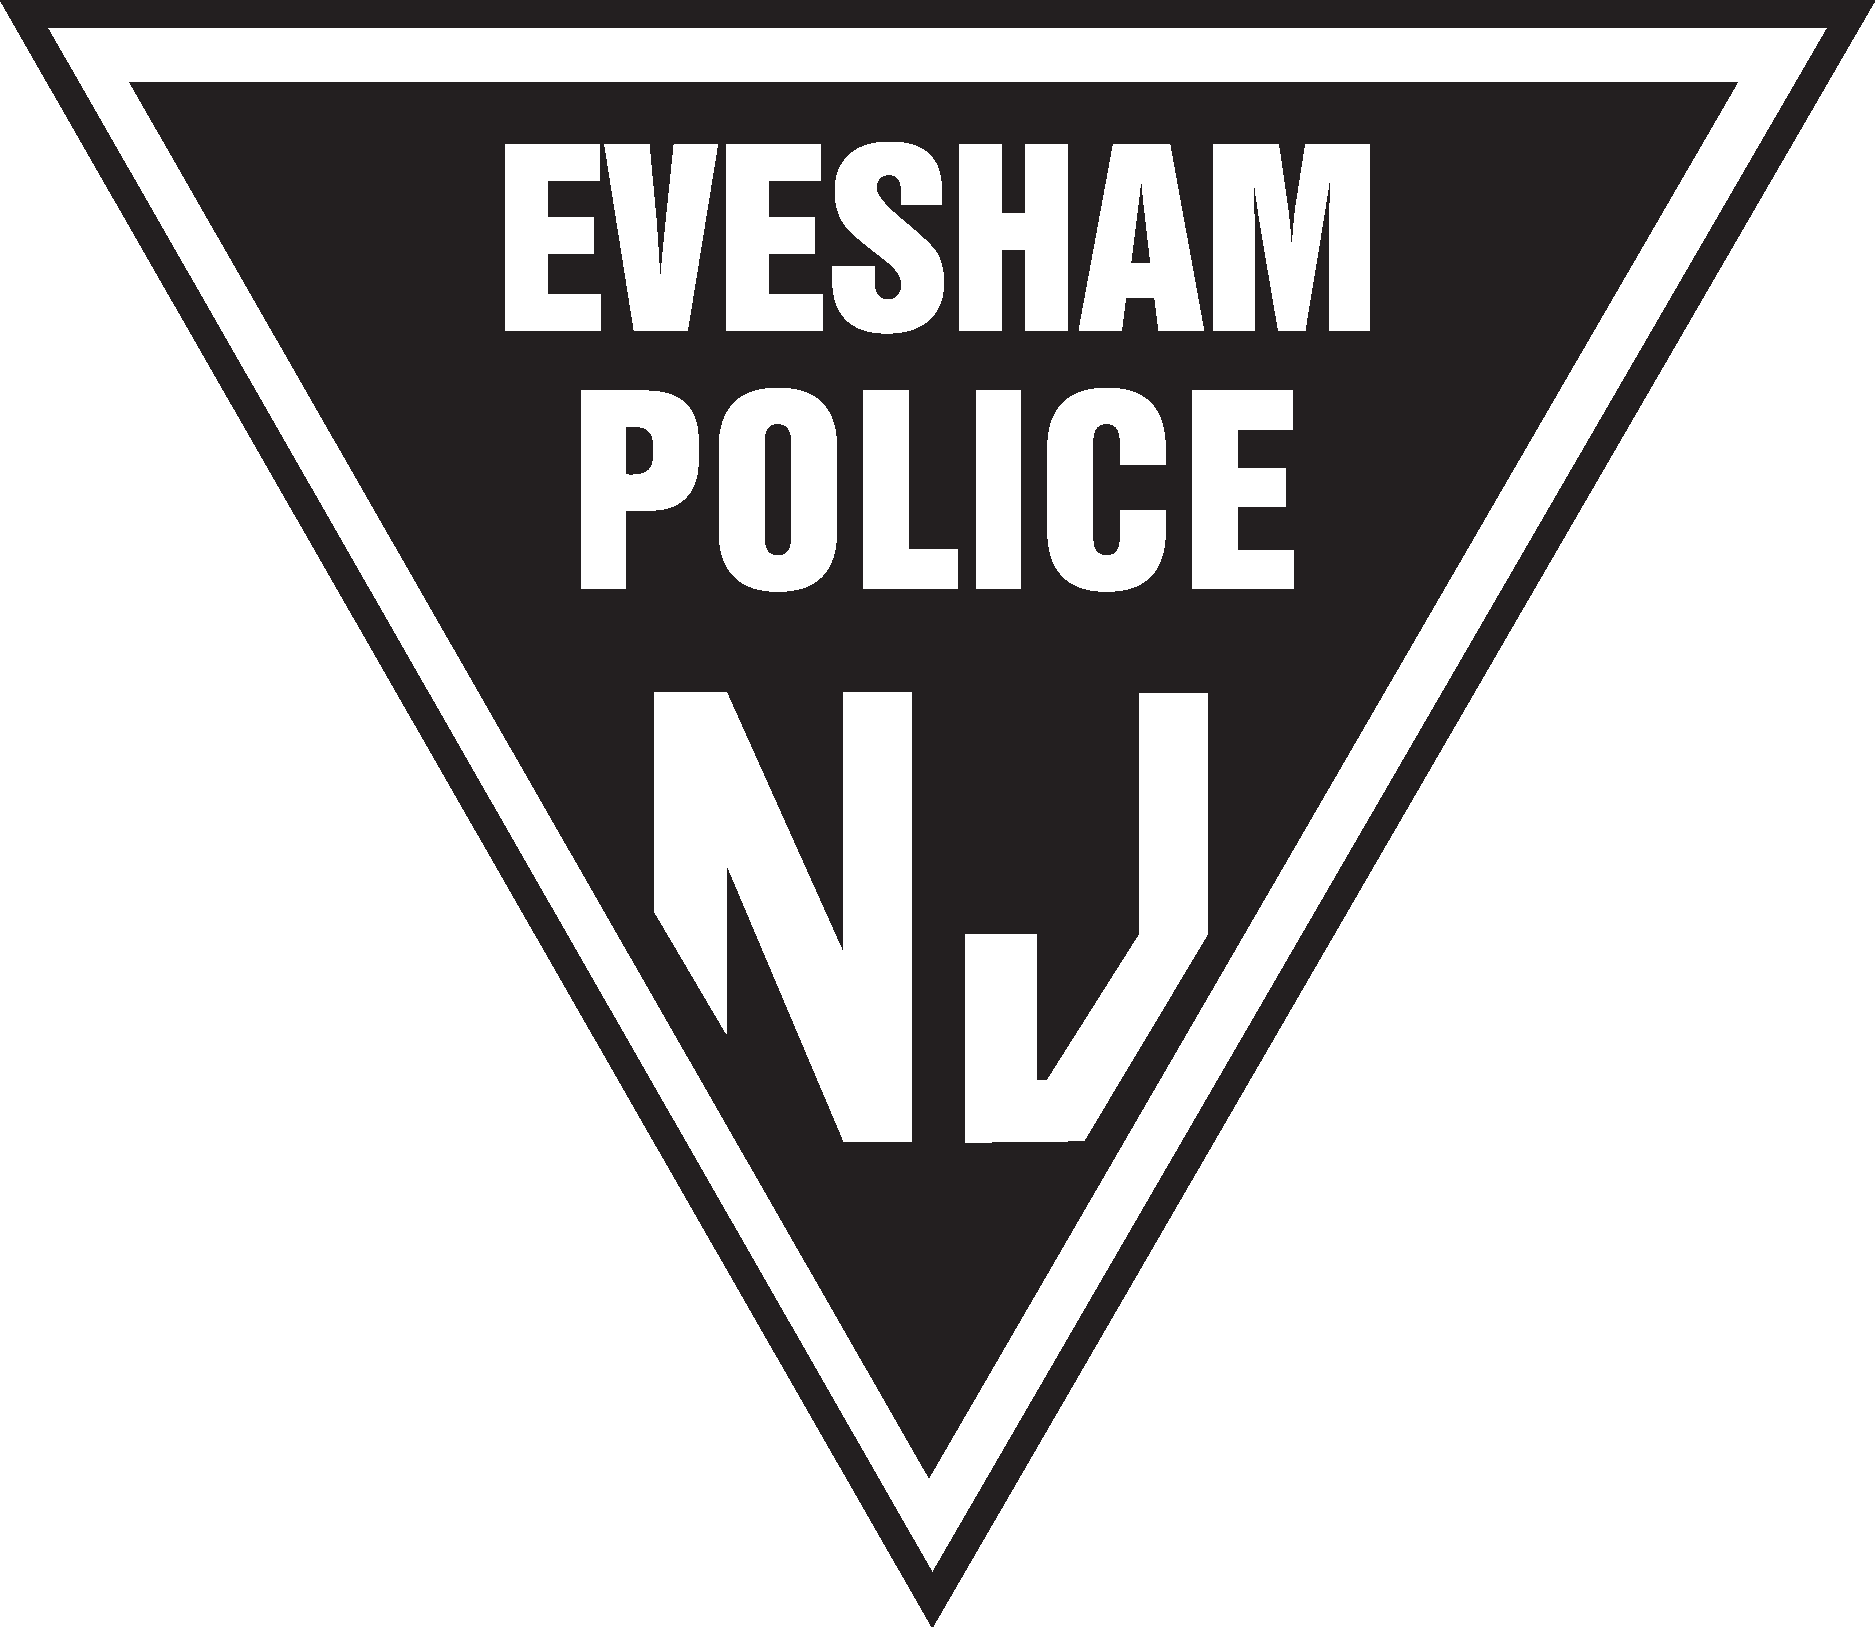 Evesham Township New Jersey Police Department Logo Vector